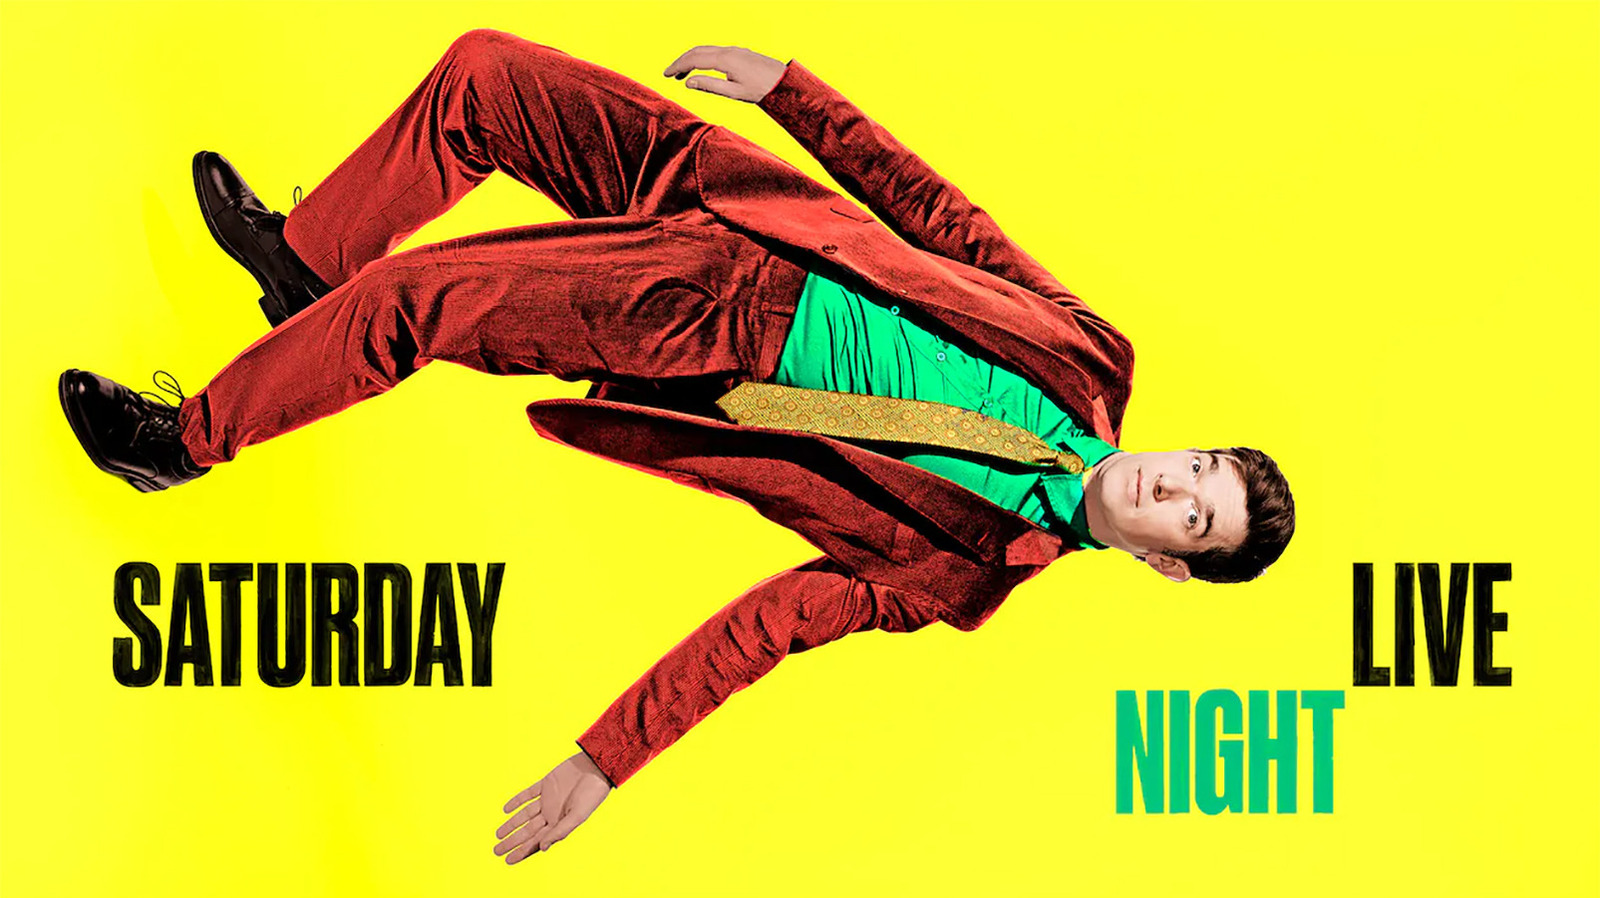 #John Mulaney Sings, Shuffles, And Gets Slimed In A Superb Saturday Night Live